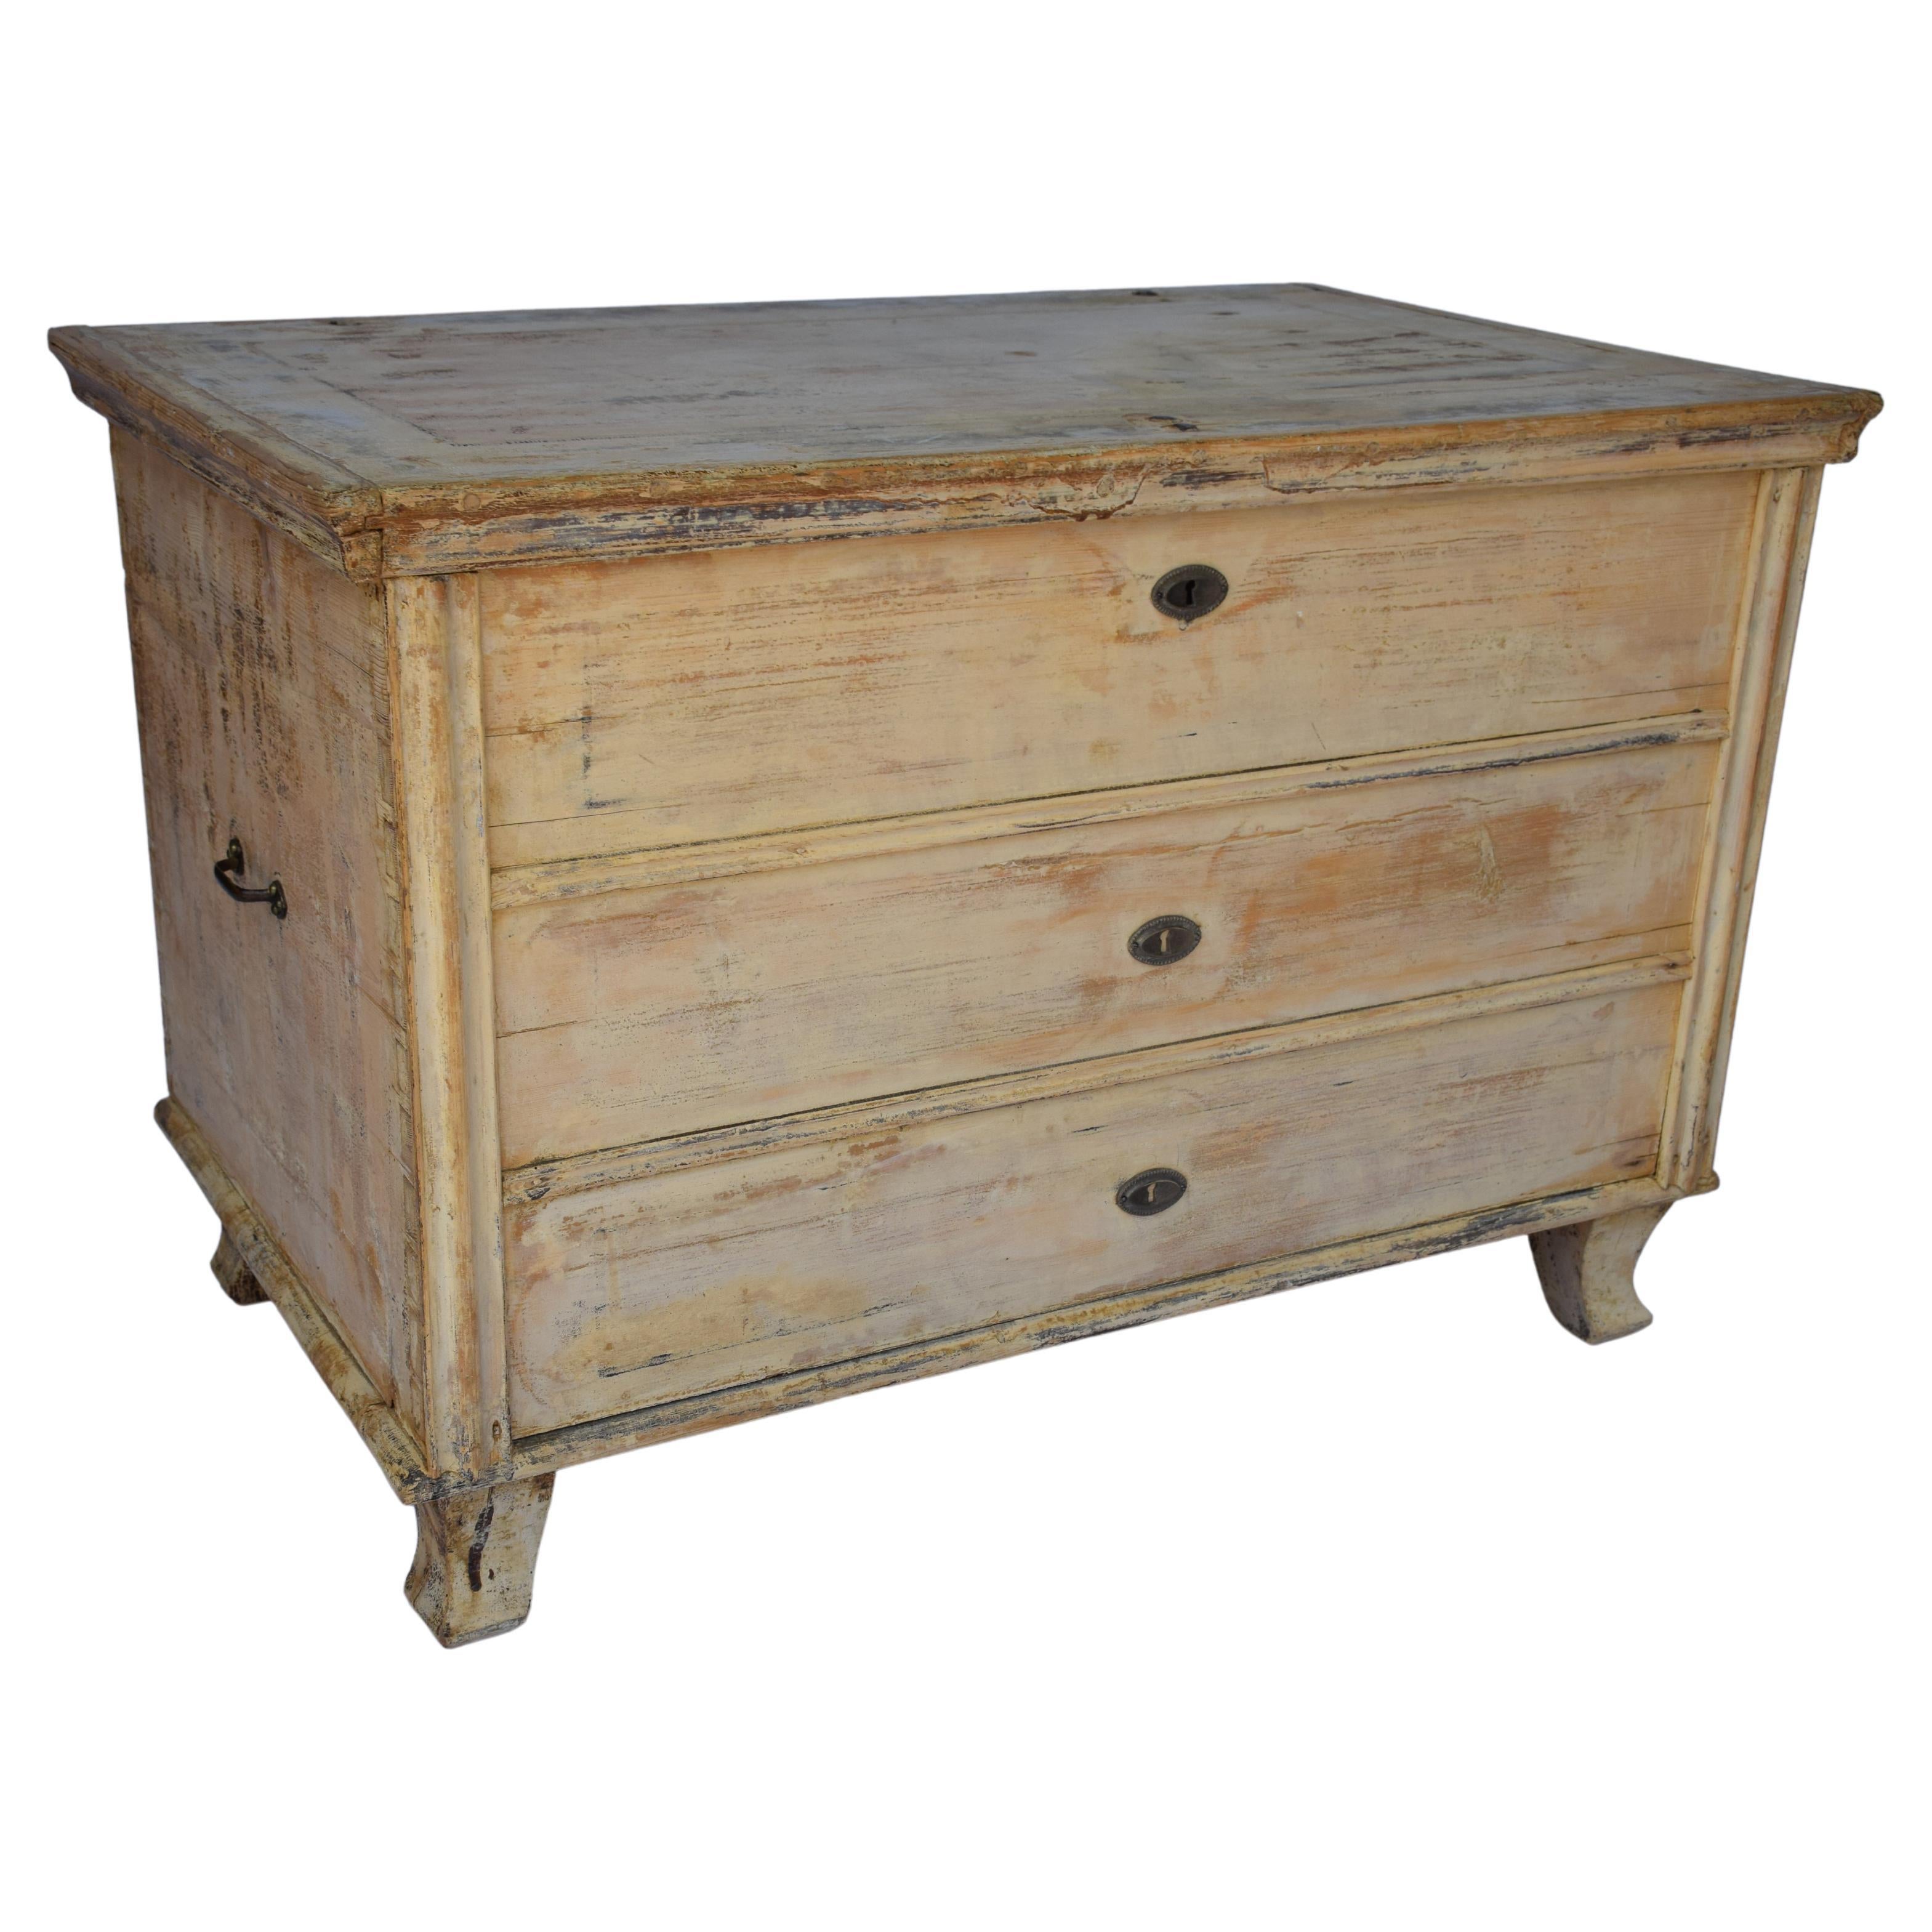 19th Century Antique Painted Flat Top Trunk For Sale